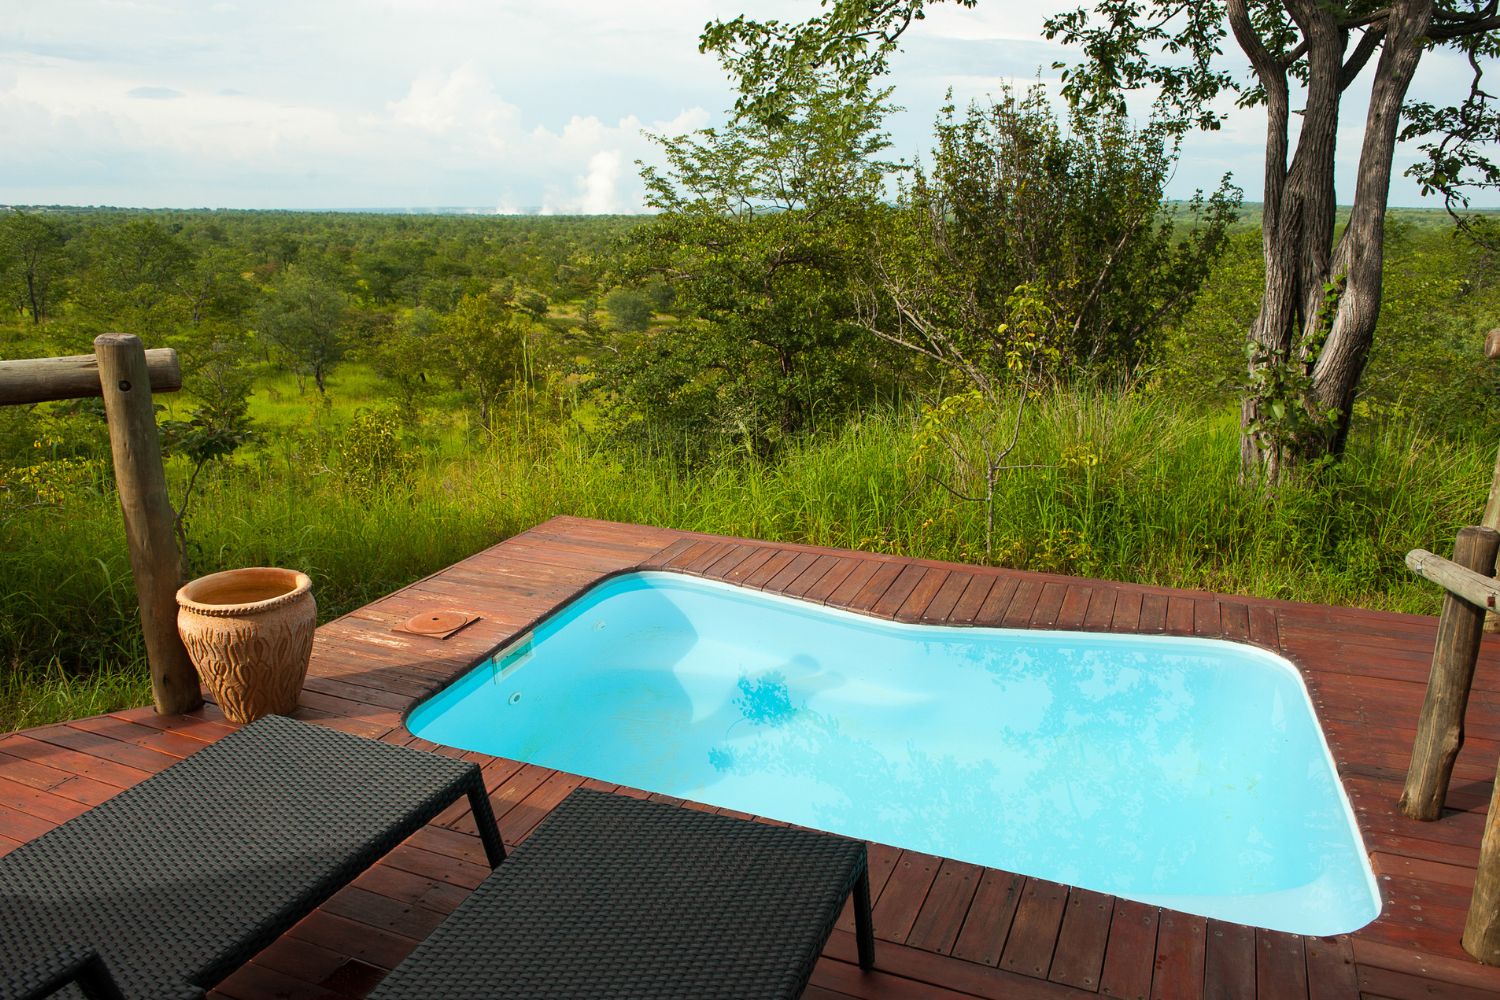 Plunge Pool Cost